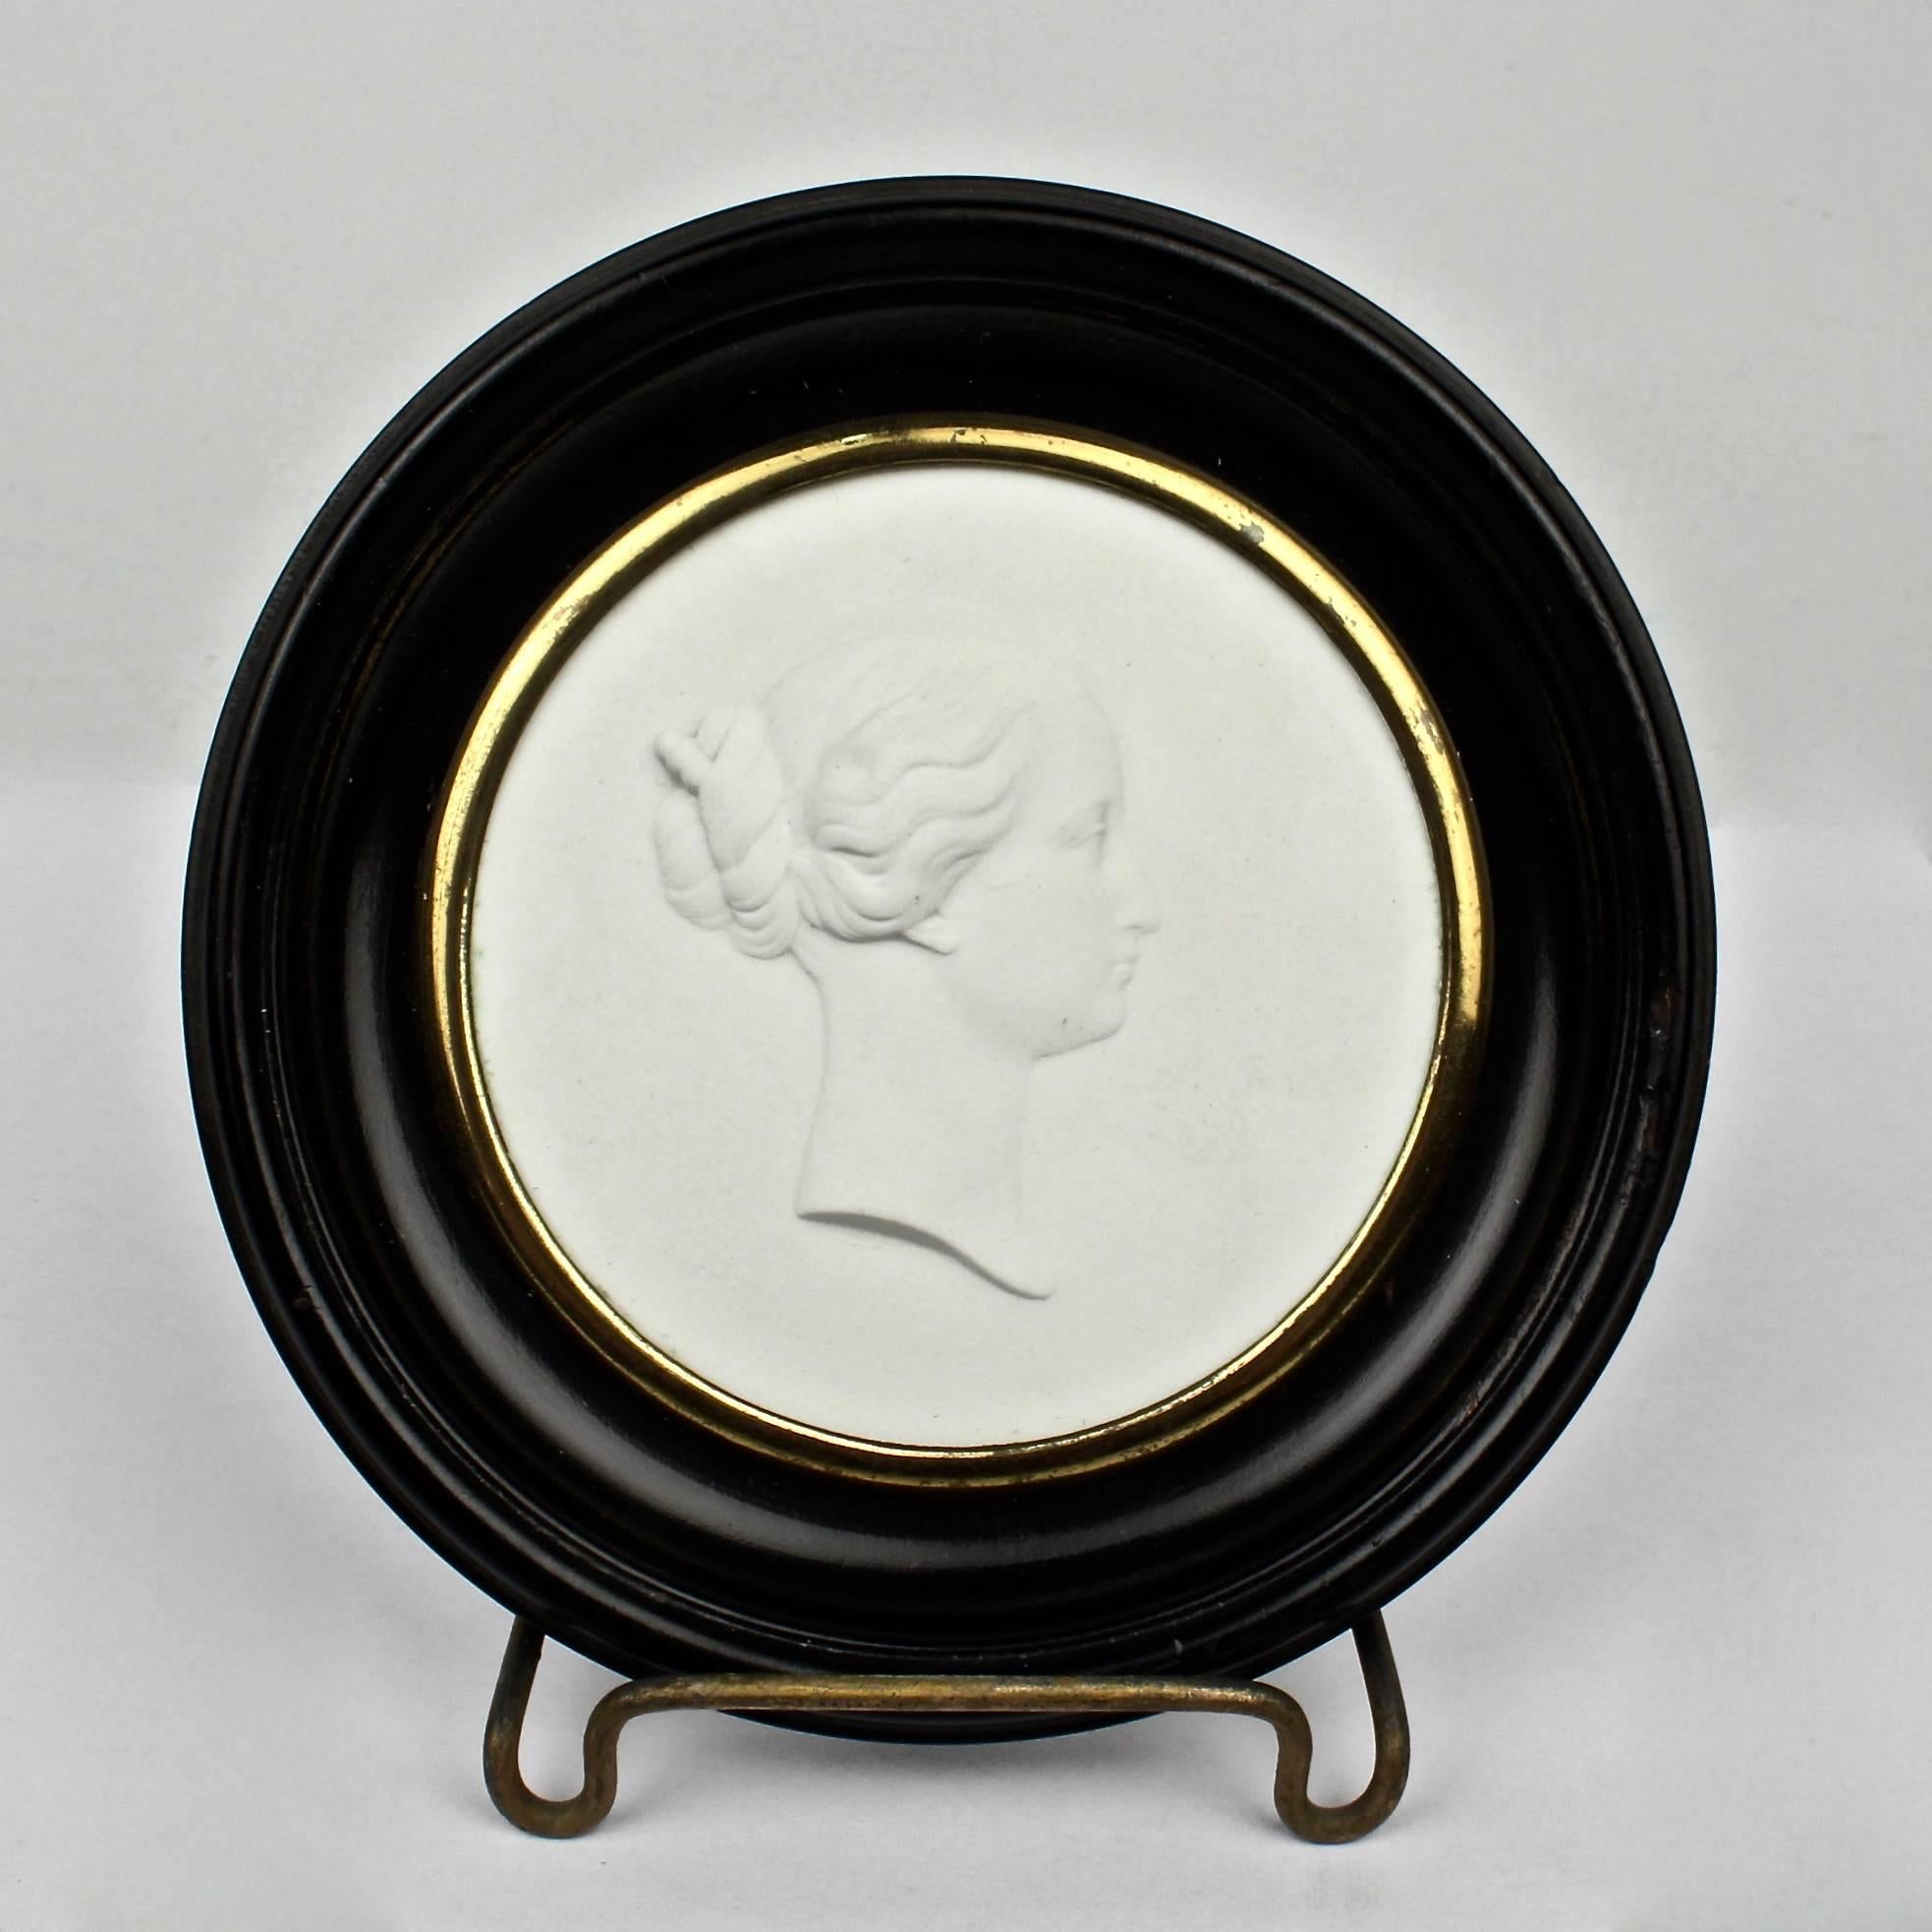 A fine pair of 19th century framed Sevres bisque medallion or rondels depicting the French Emperor Charles-Louis Napoleon Bonaparte (or Napoleon III) and his wife, Eugénie du Derje de Montijo. 

We believe that these small plaques were issues by